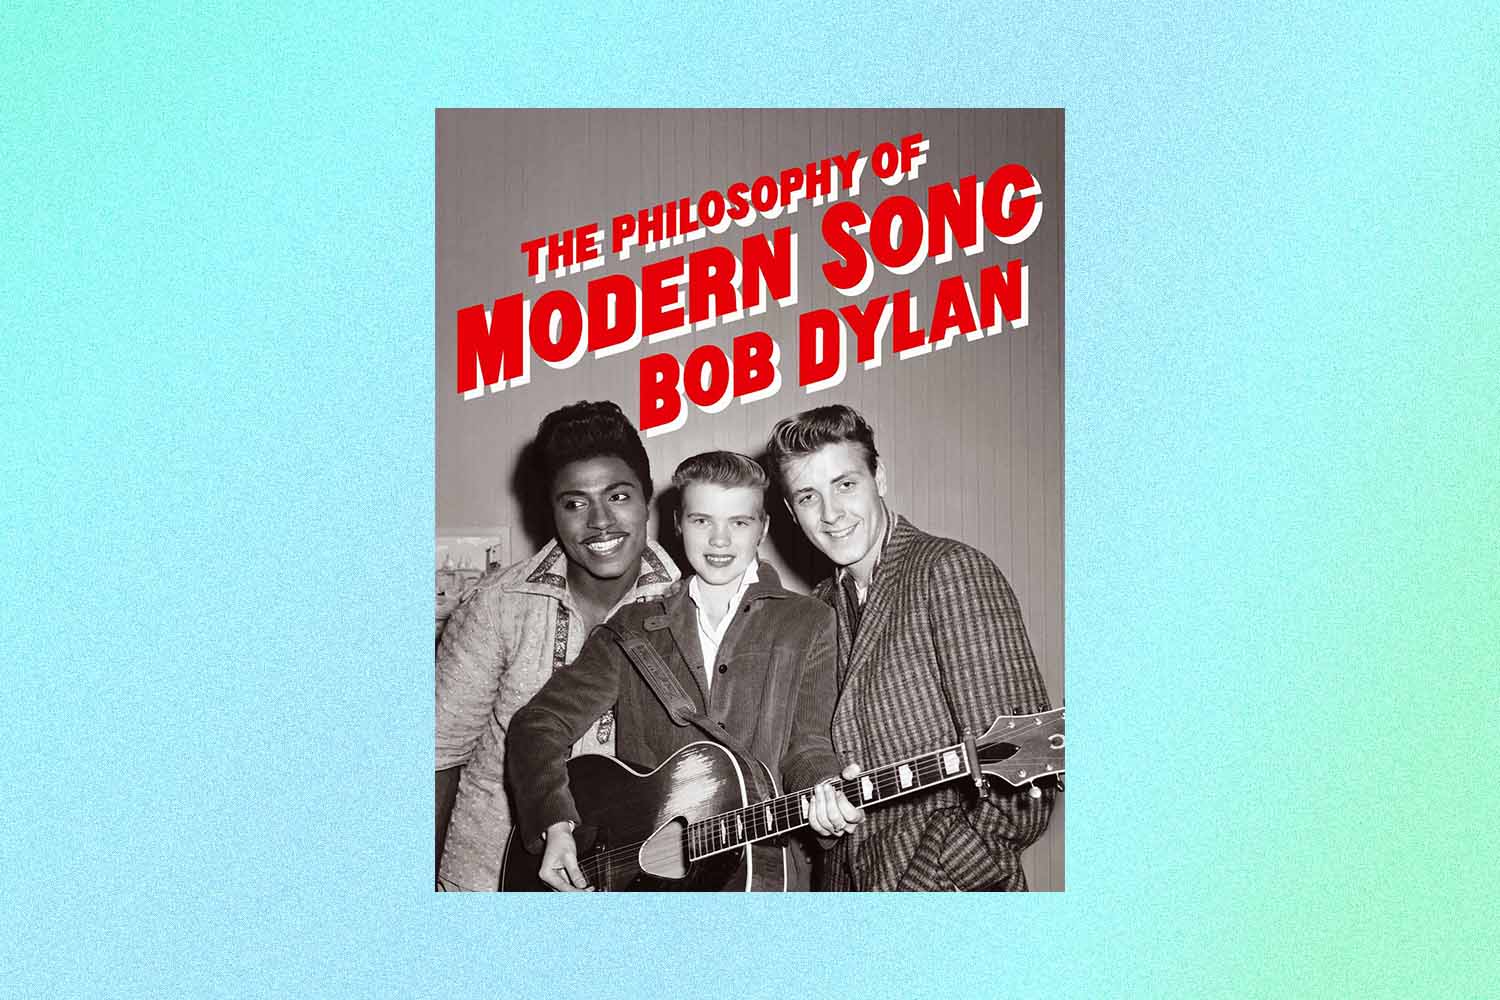 The Philosophy of Modern Song by Bob Dylan book cover